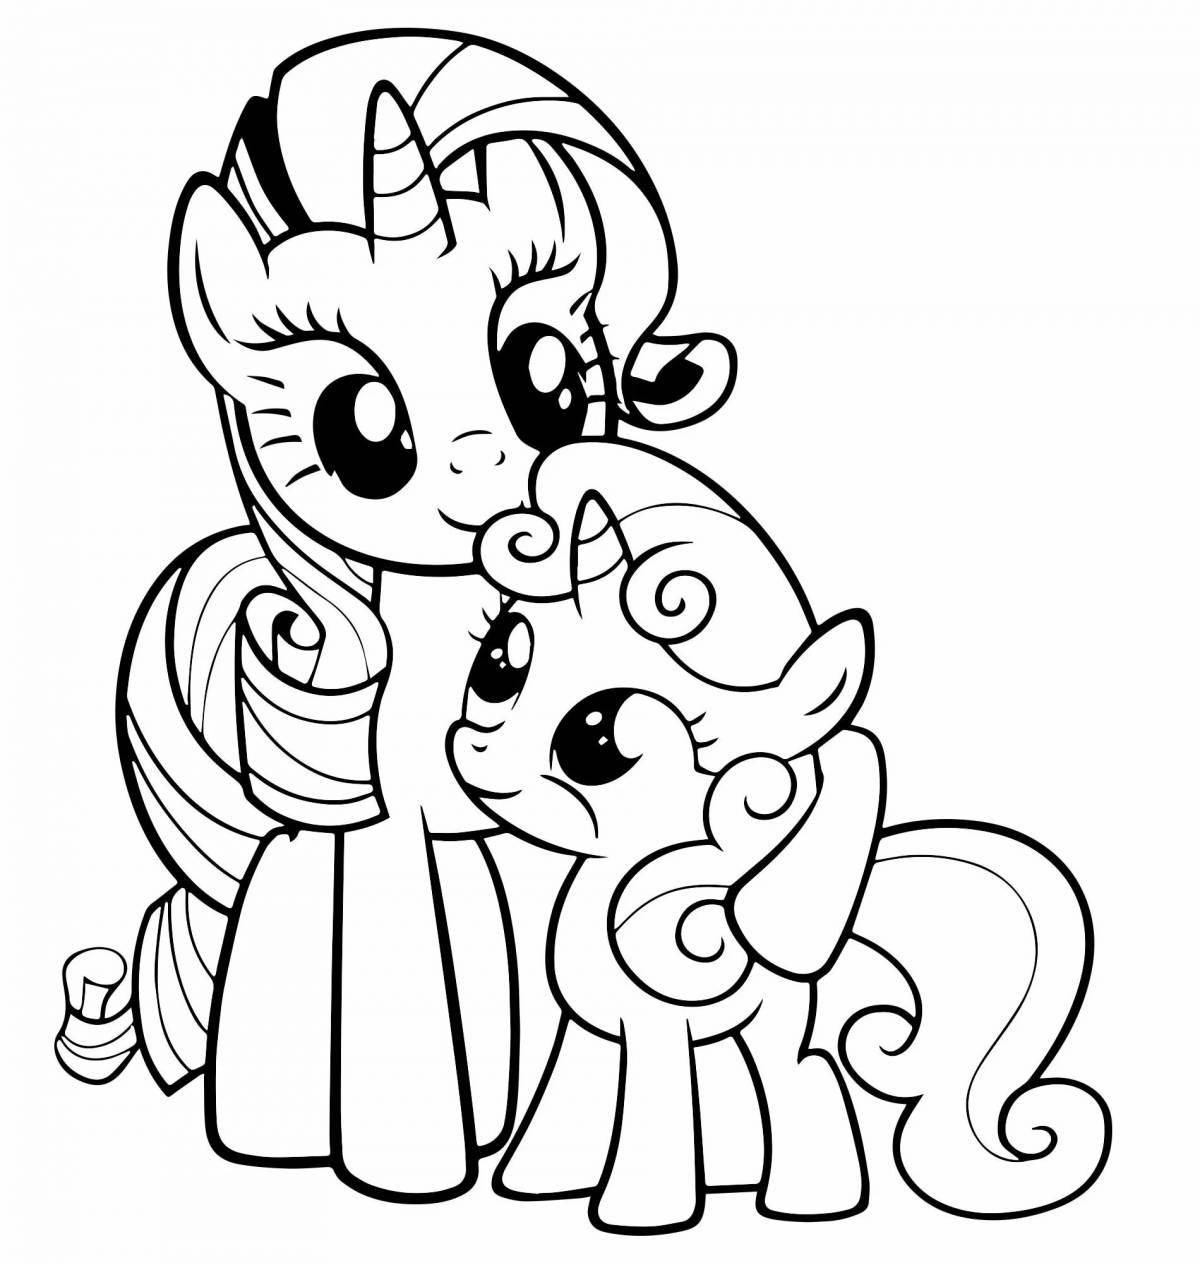 Fancy cute pony coloring for kids